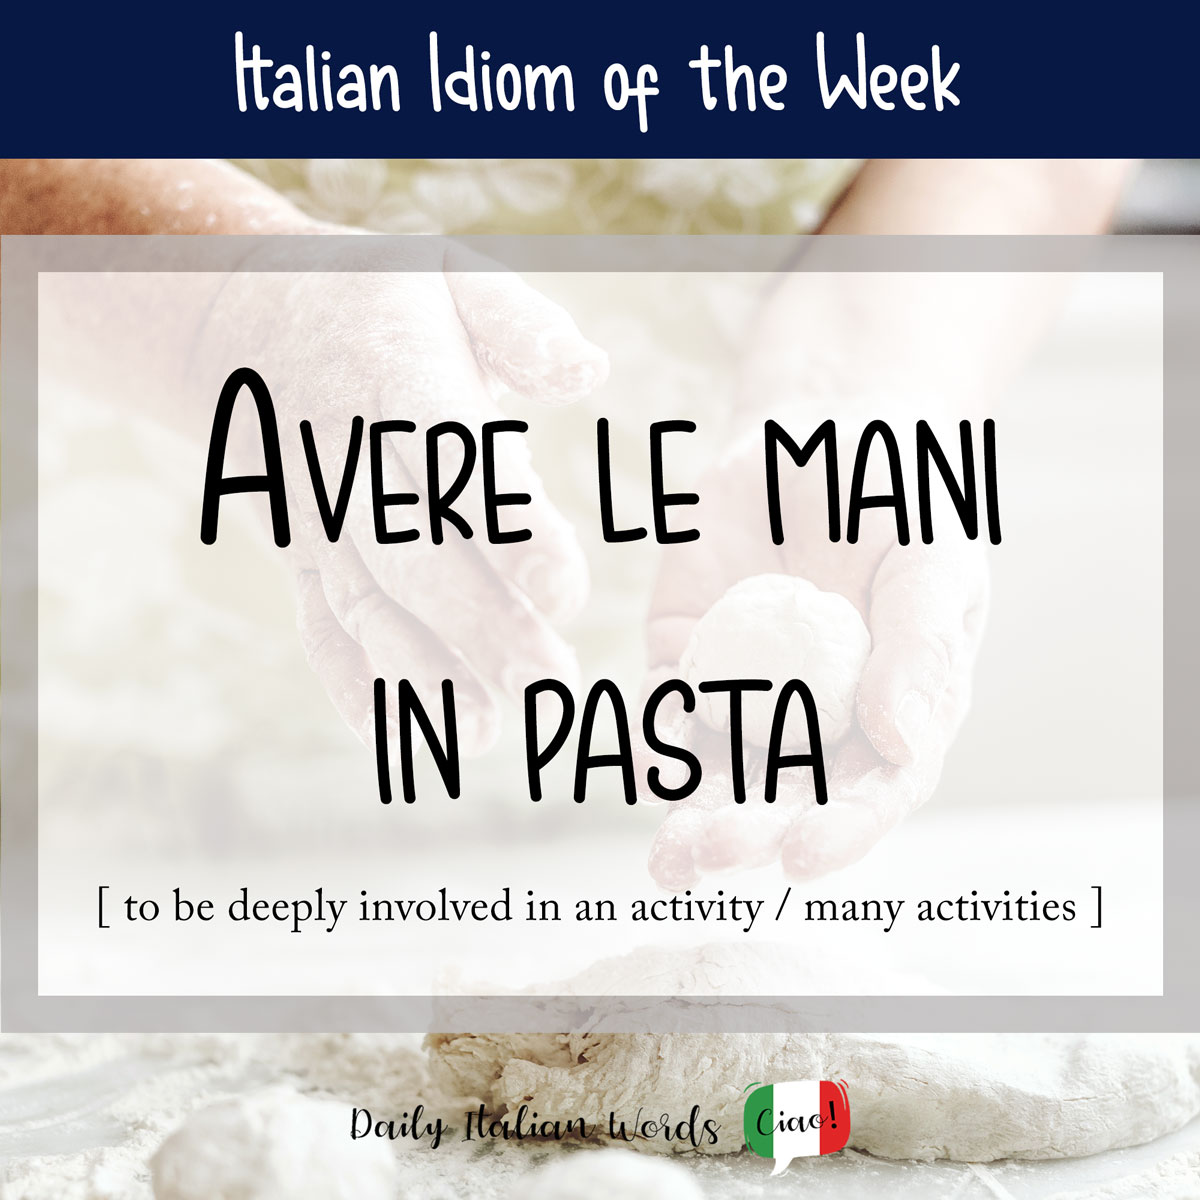 Italian Idiom: Avere le mani in pasta (to be concerned in an exercise / many actions)